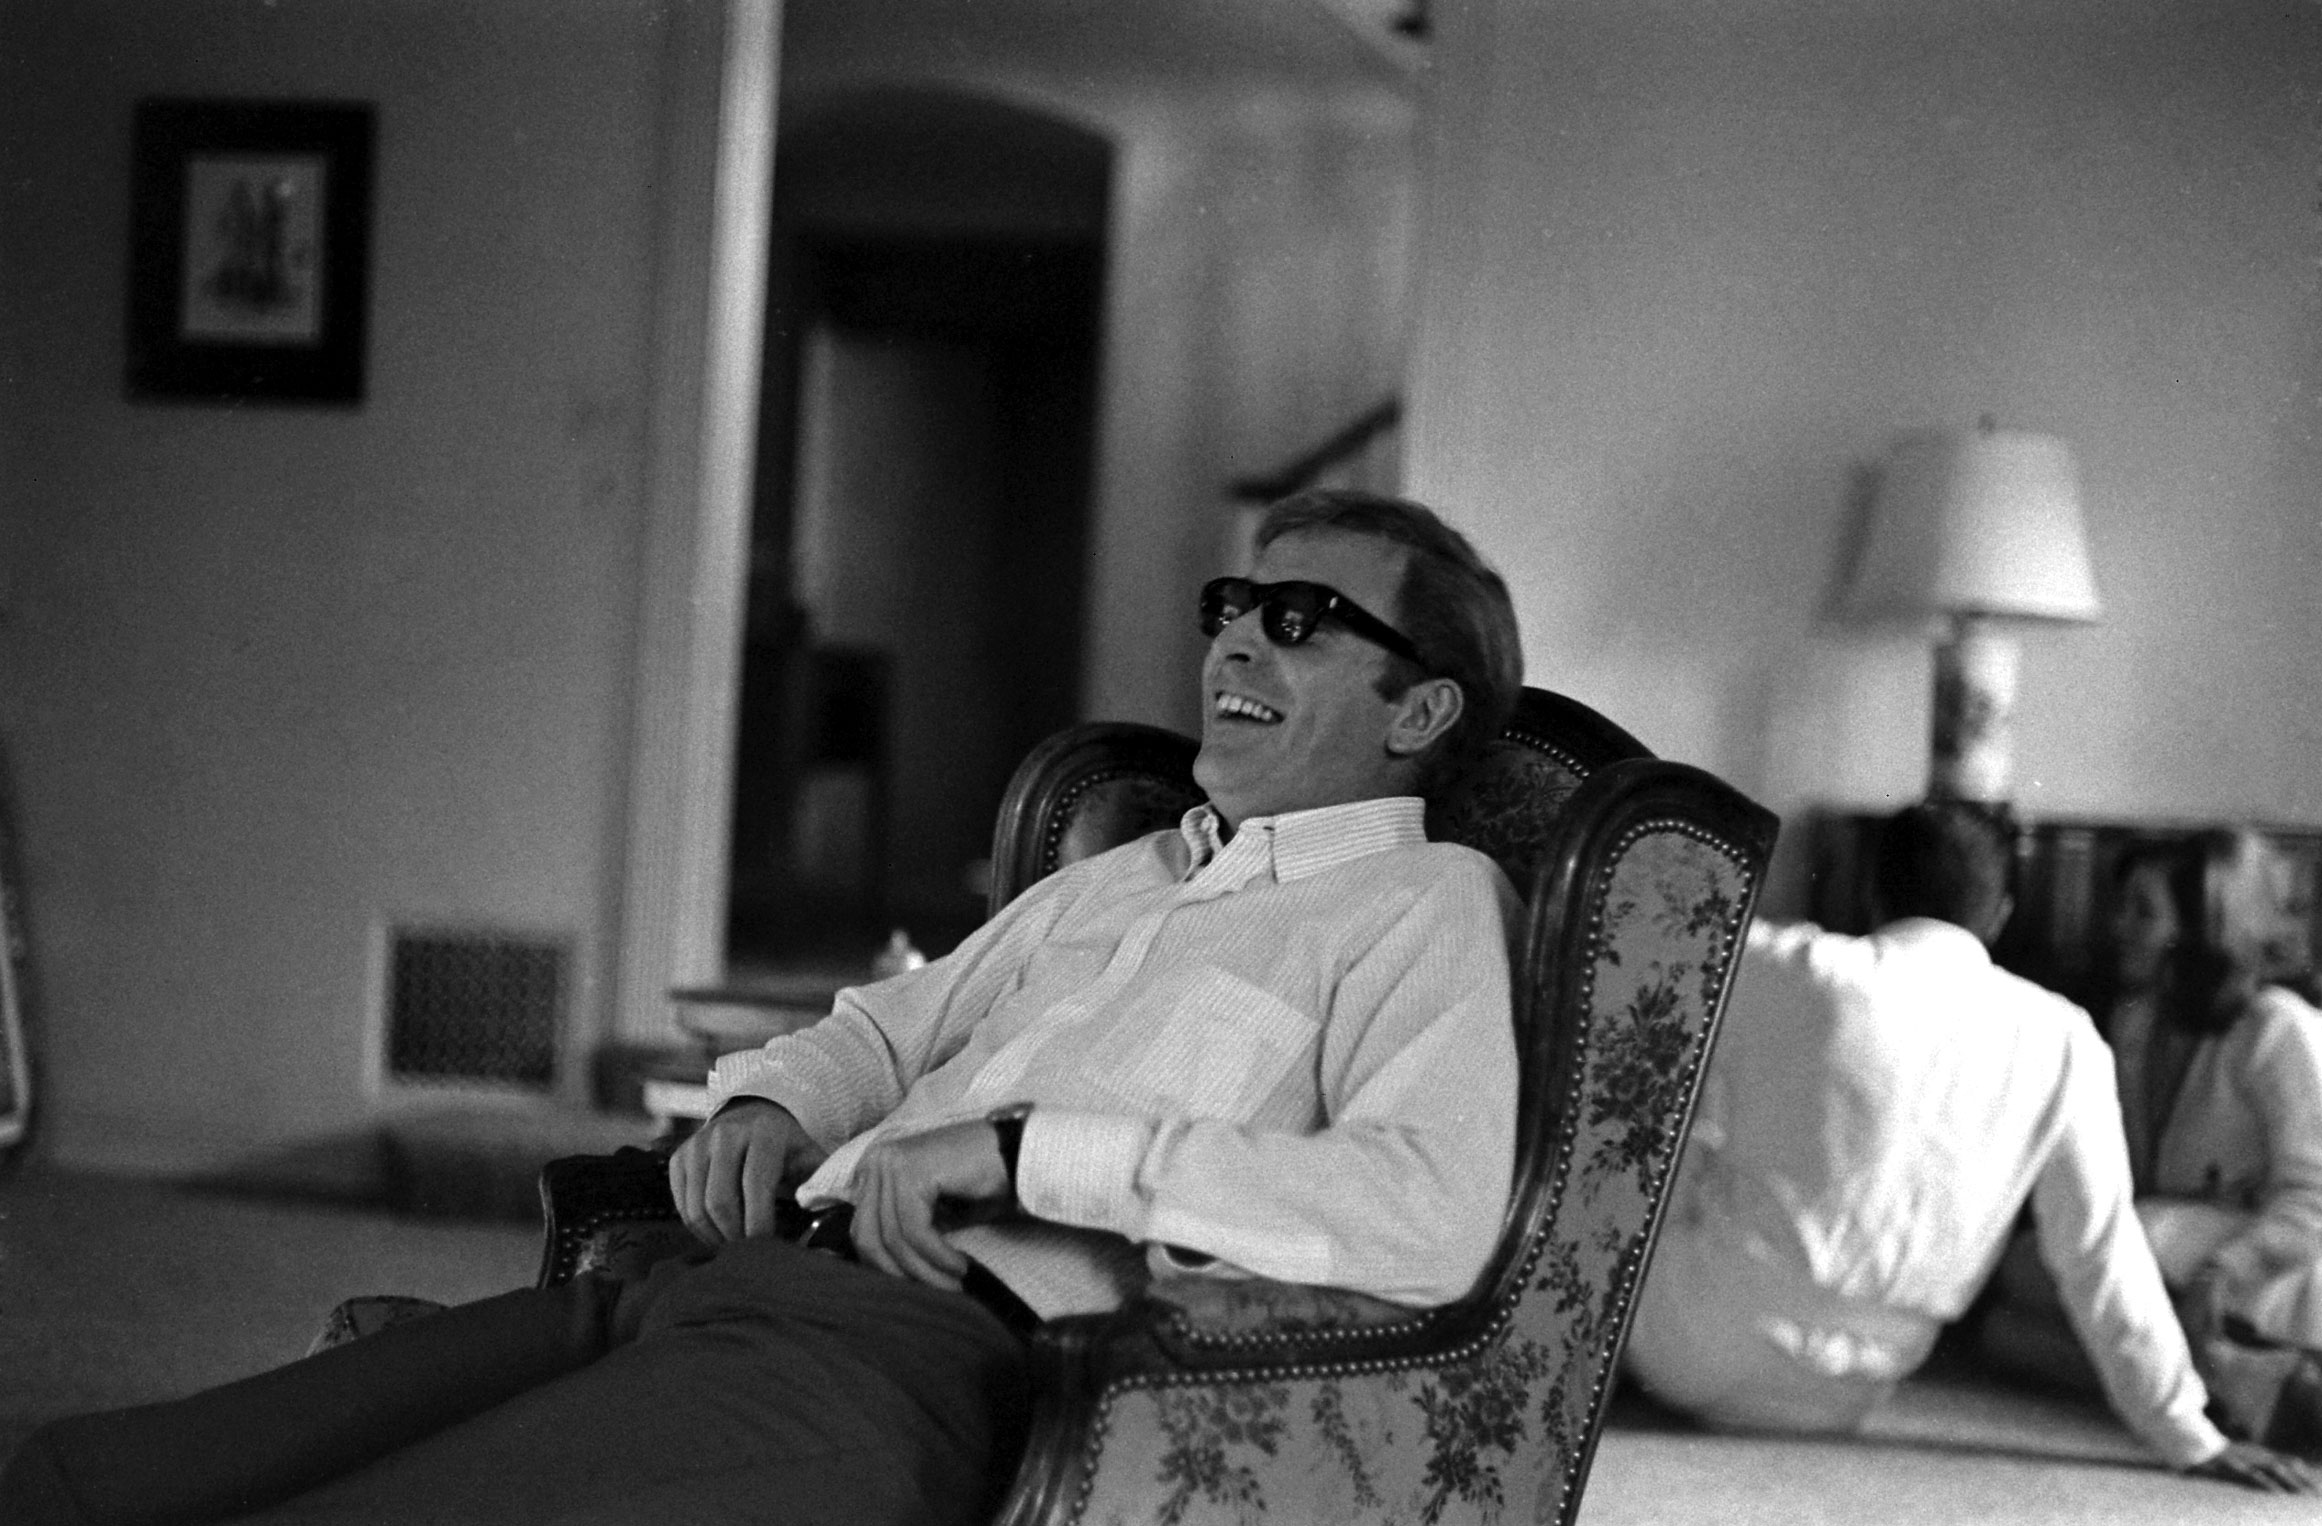 Michael Caine laughing, Los Angeles, 1966.